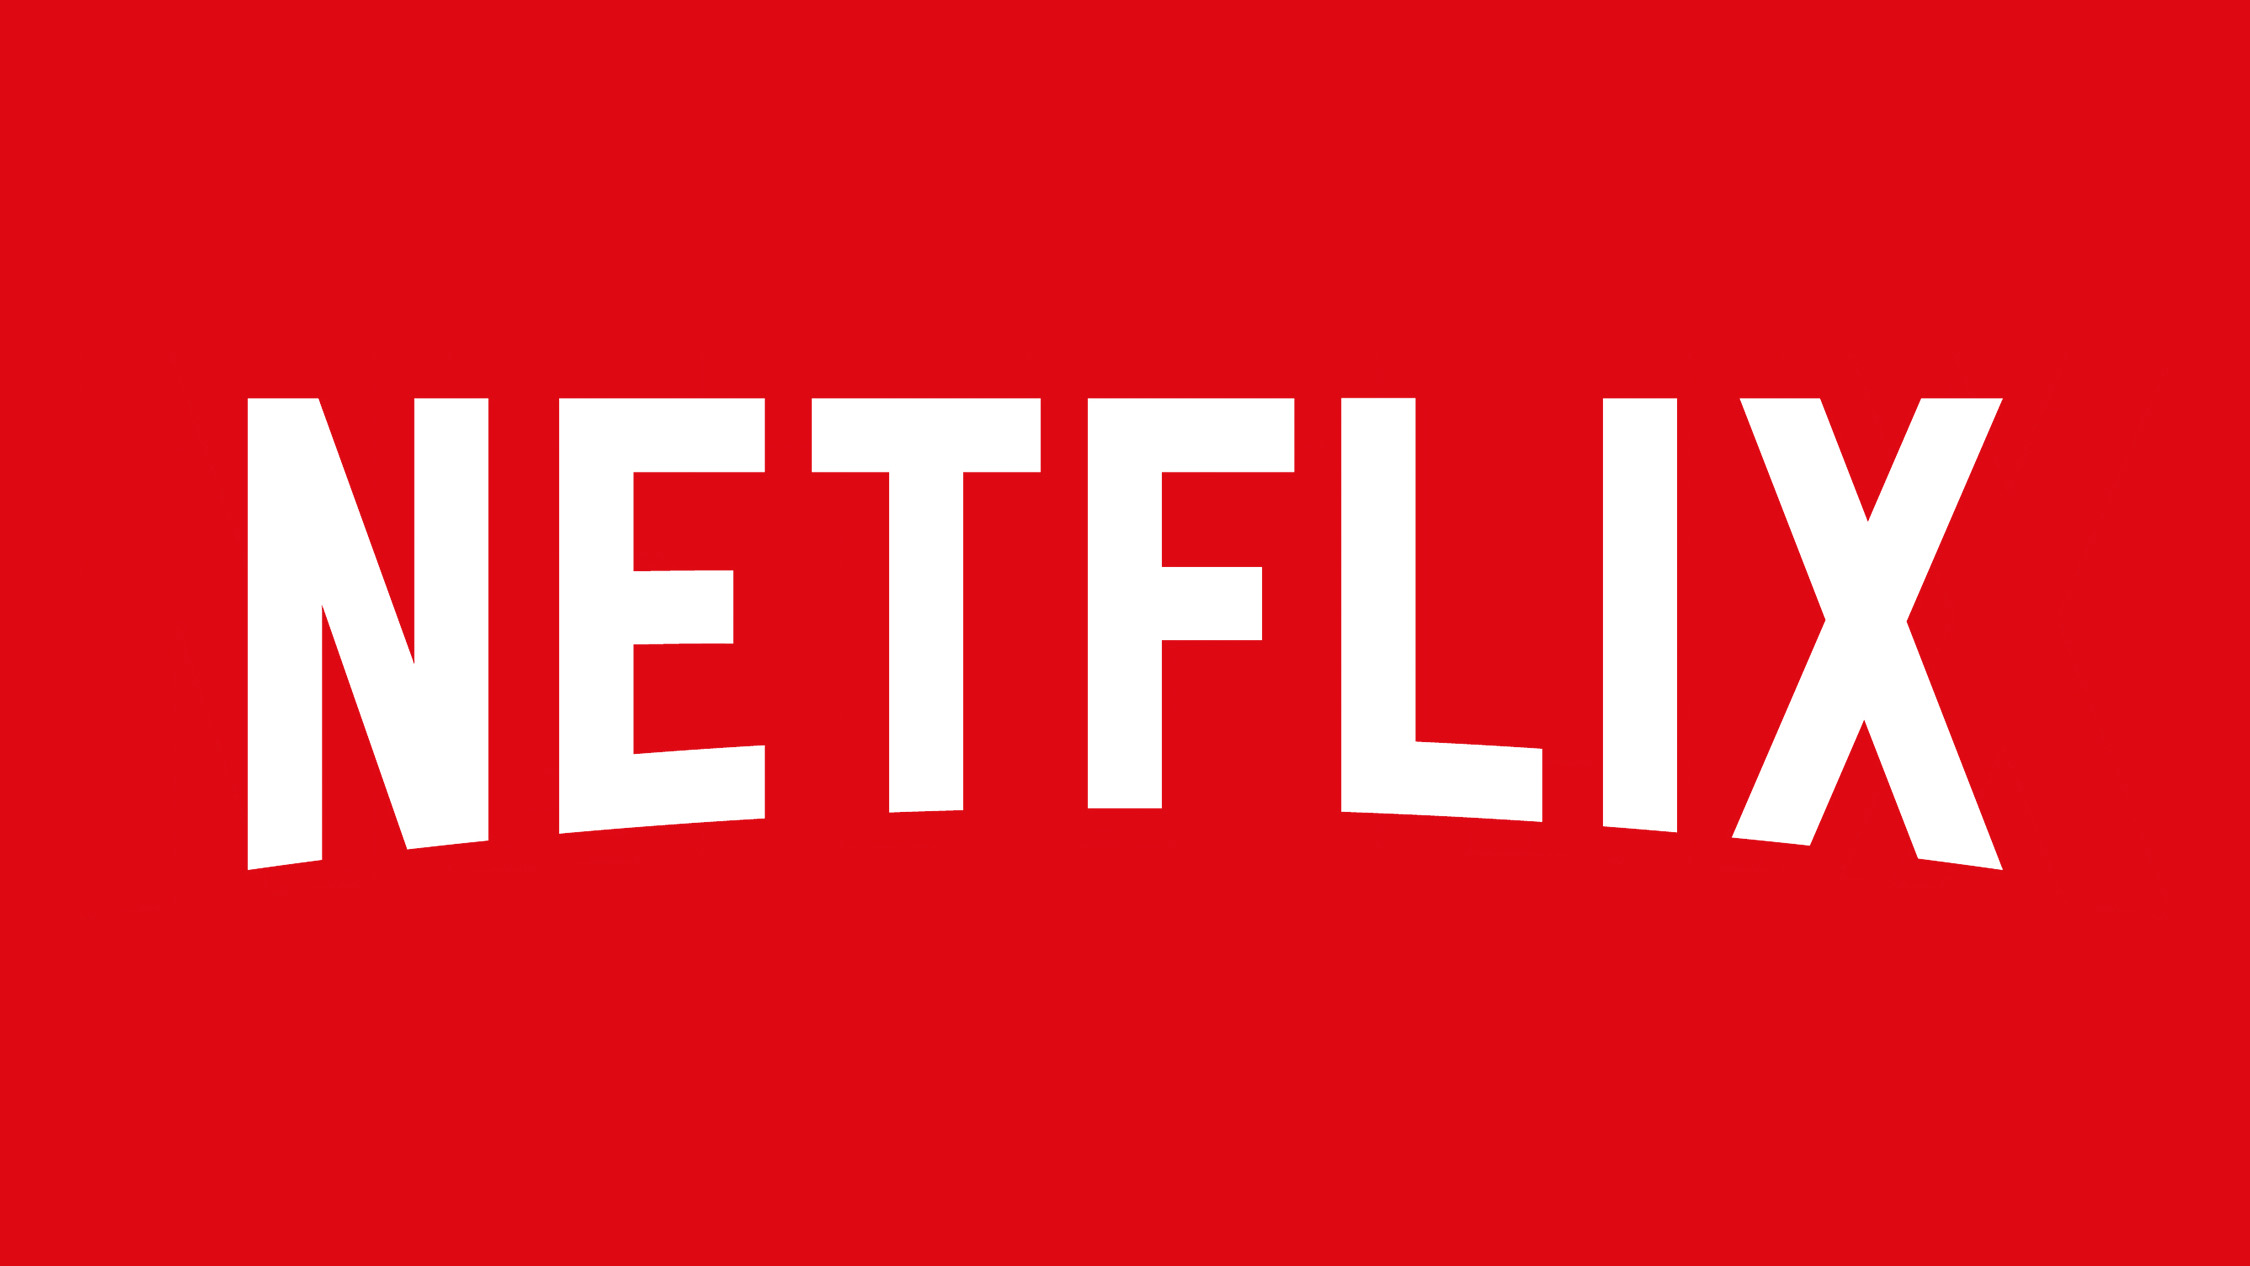 40 Million People Subscribe to Netflix's Ad-Supported Tier